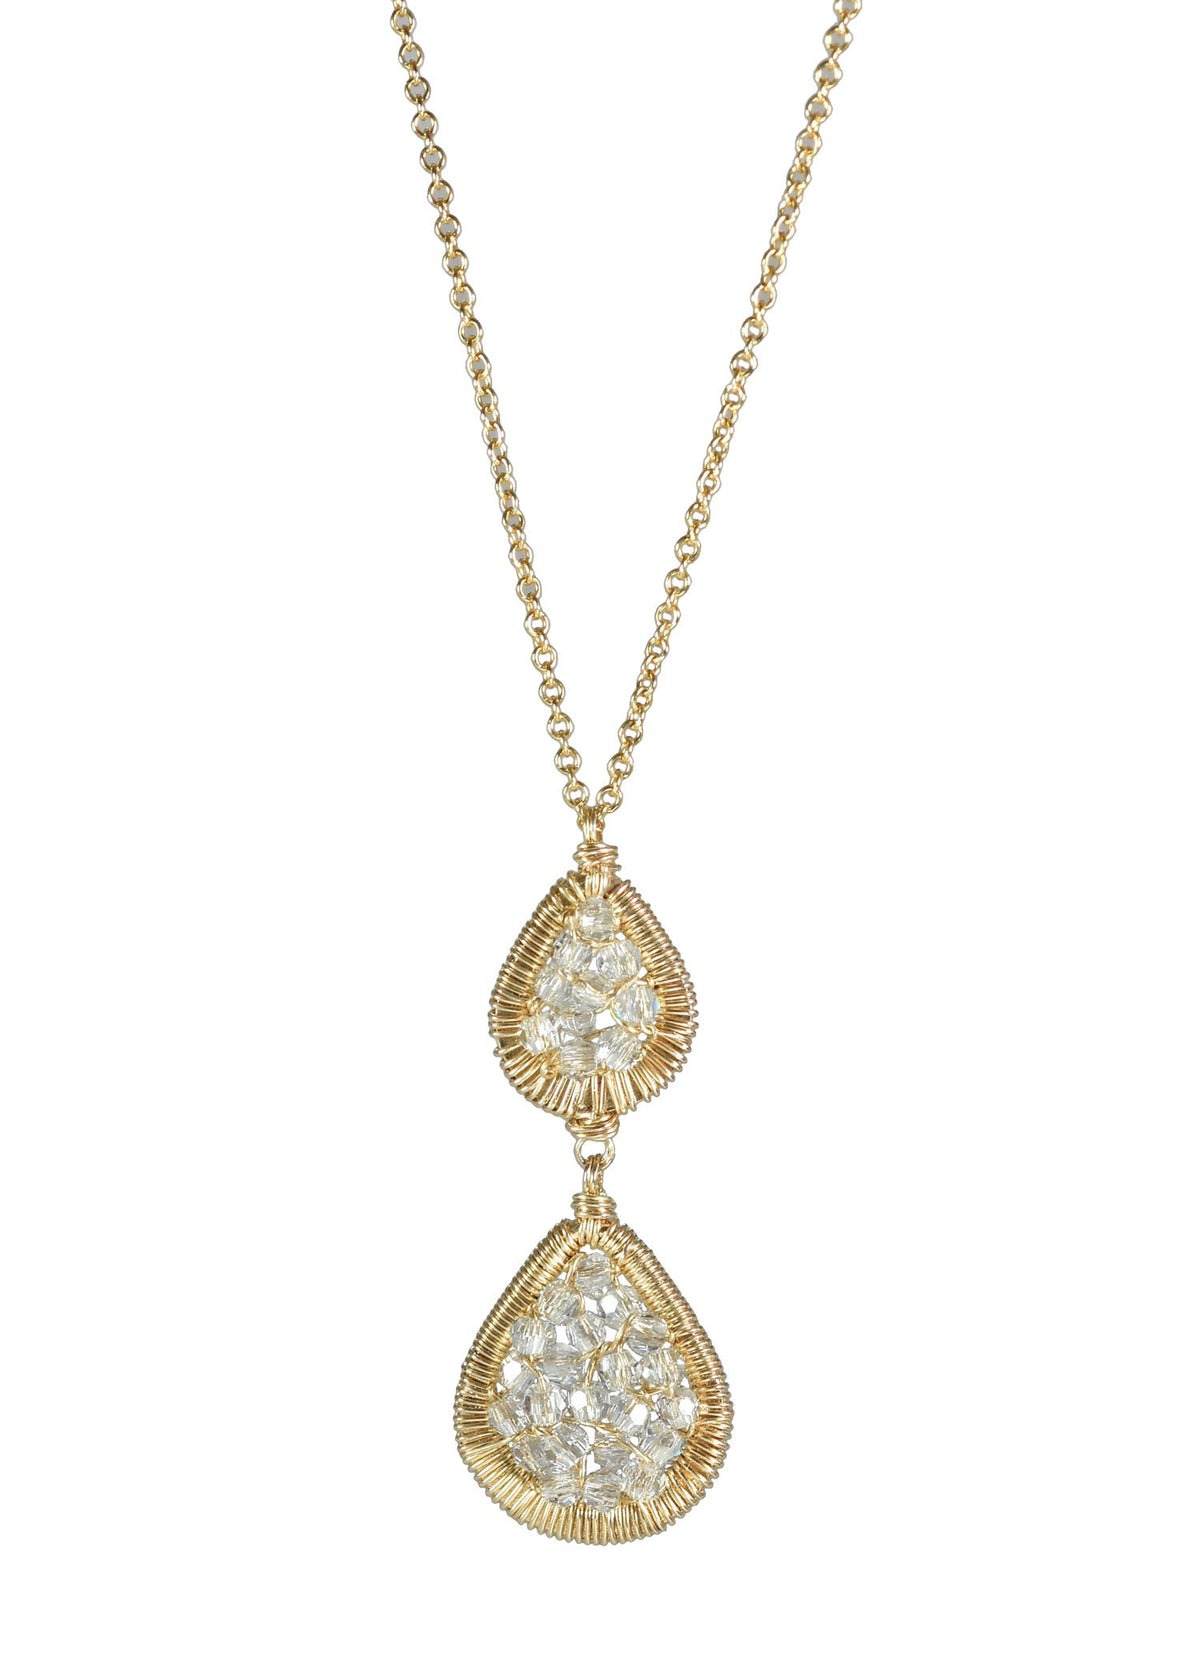 Crystal 14k gold fill Necklace measures 16” in length Pendant measures 1-3/16” in length and 1/2” in width Handmade in our Los Angeles studio